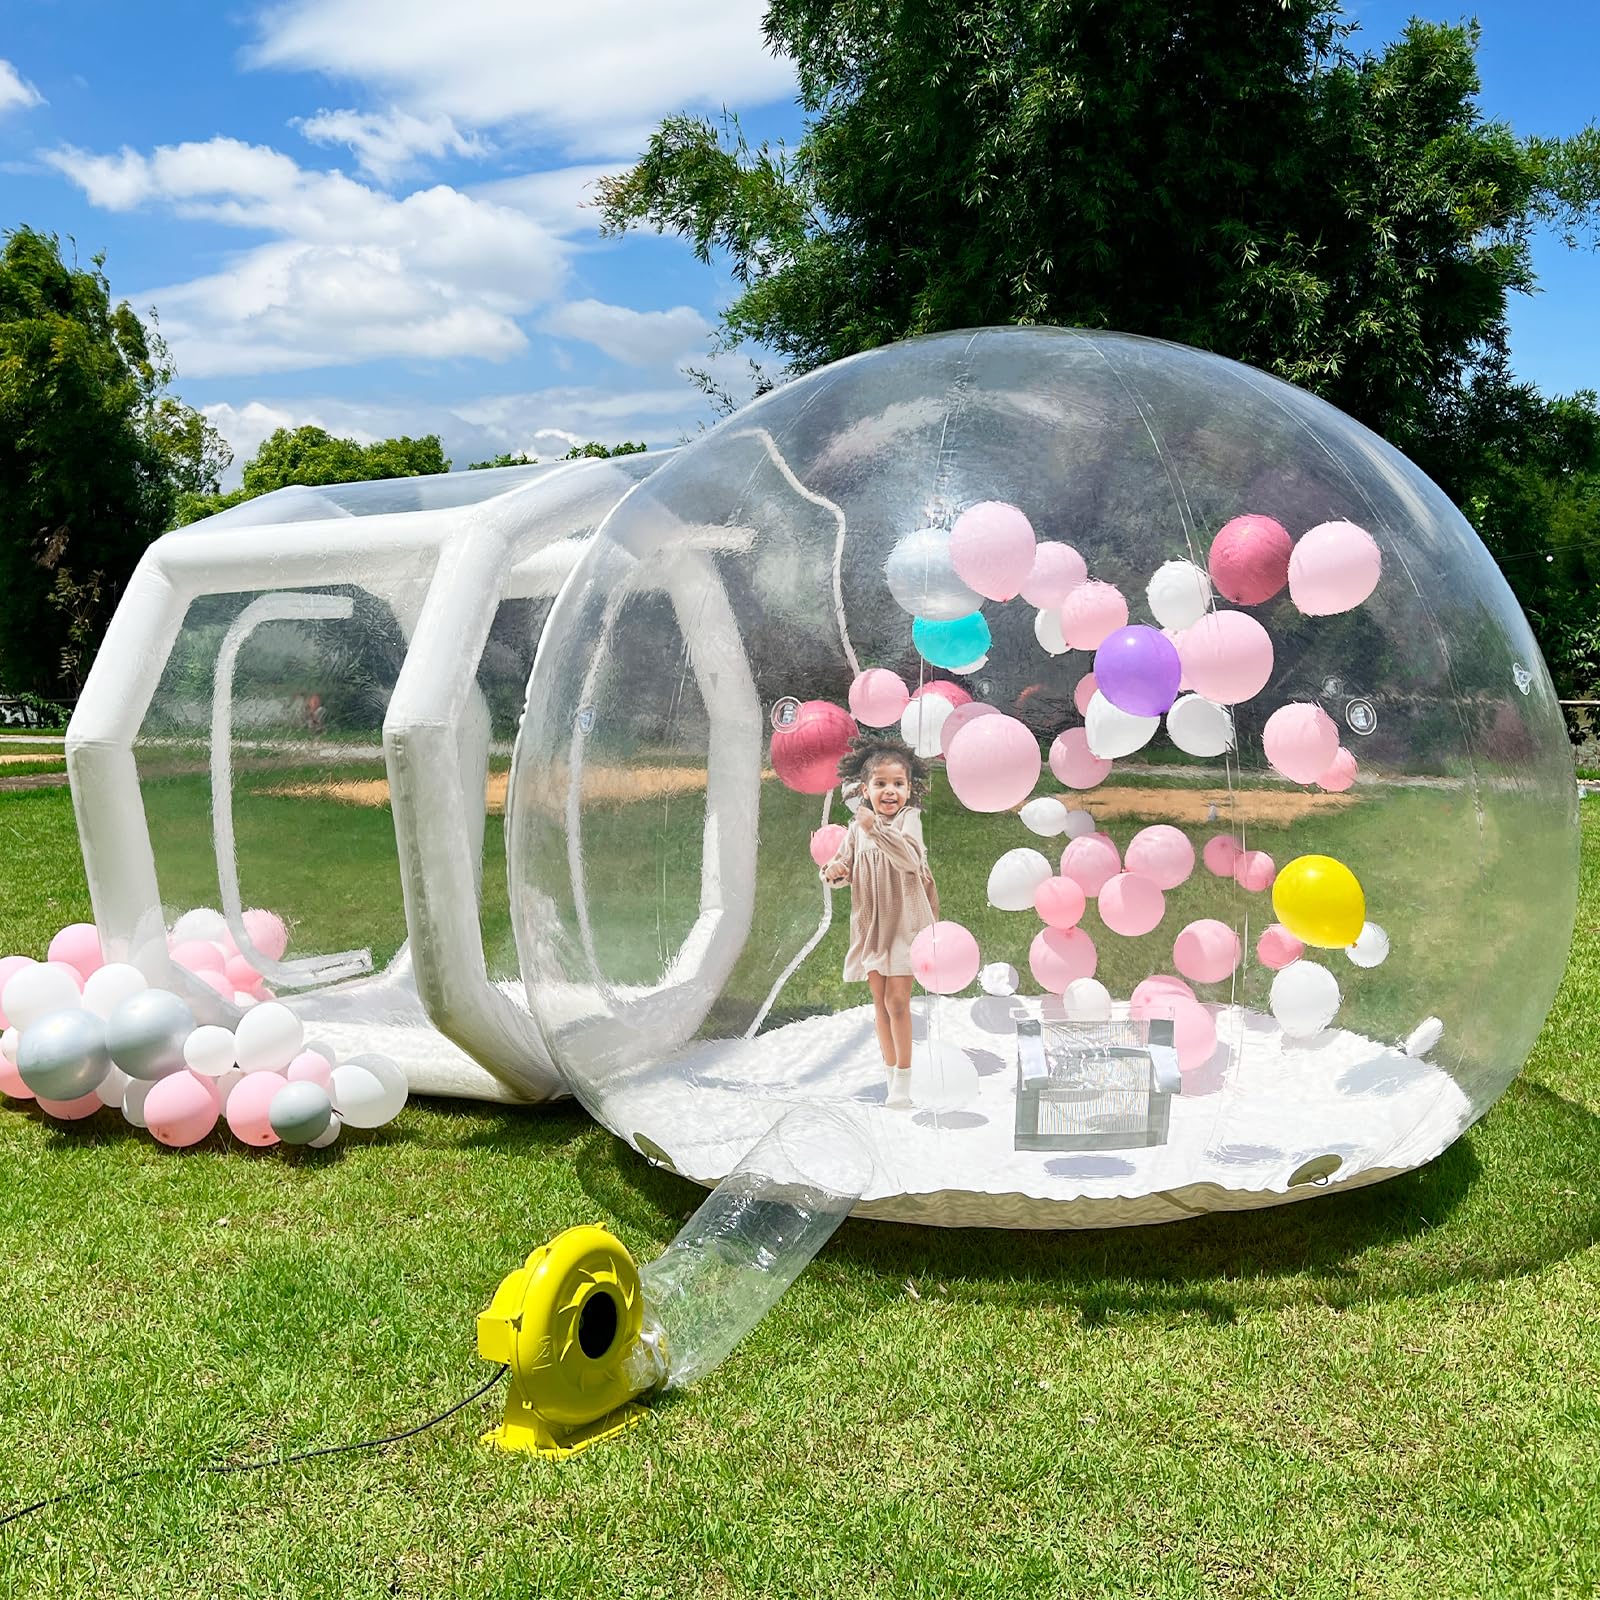 Inflatable Bubble House, Commercial Grade PVC Transparent Bubble Tent Dome Inflatable with Pump& Air Blower for Kids Party Balloons, Events, Display, 10ft Dia Clear Bubble